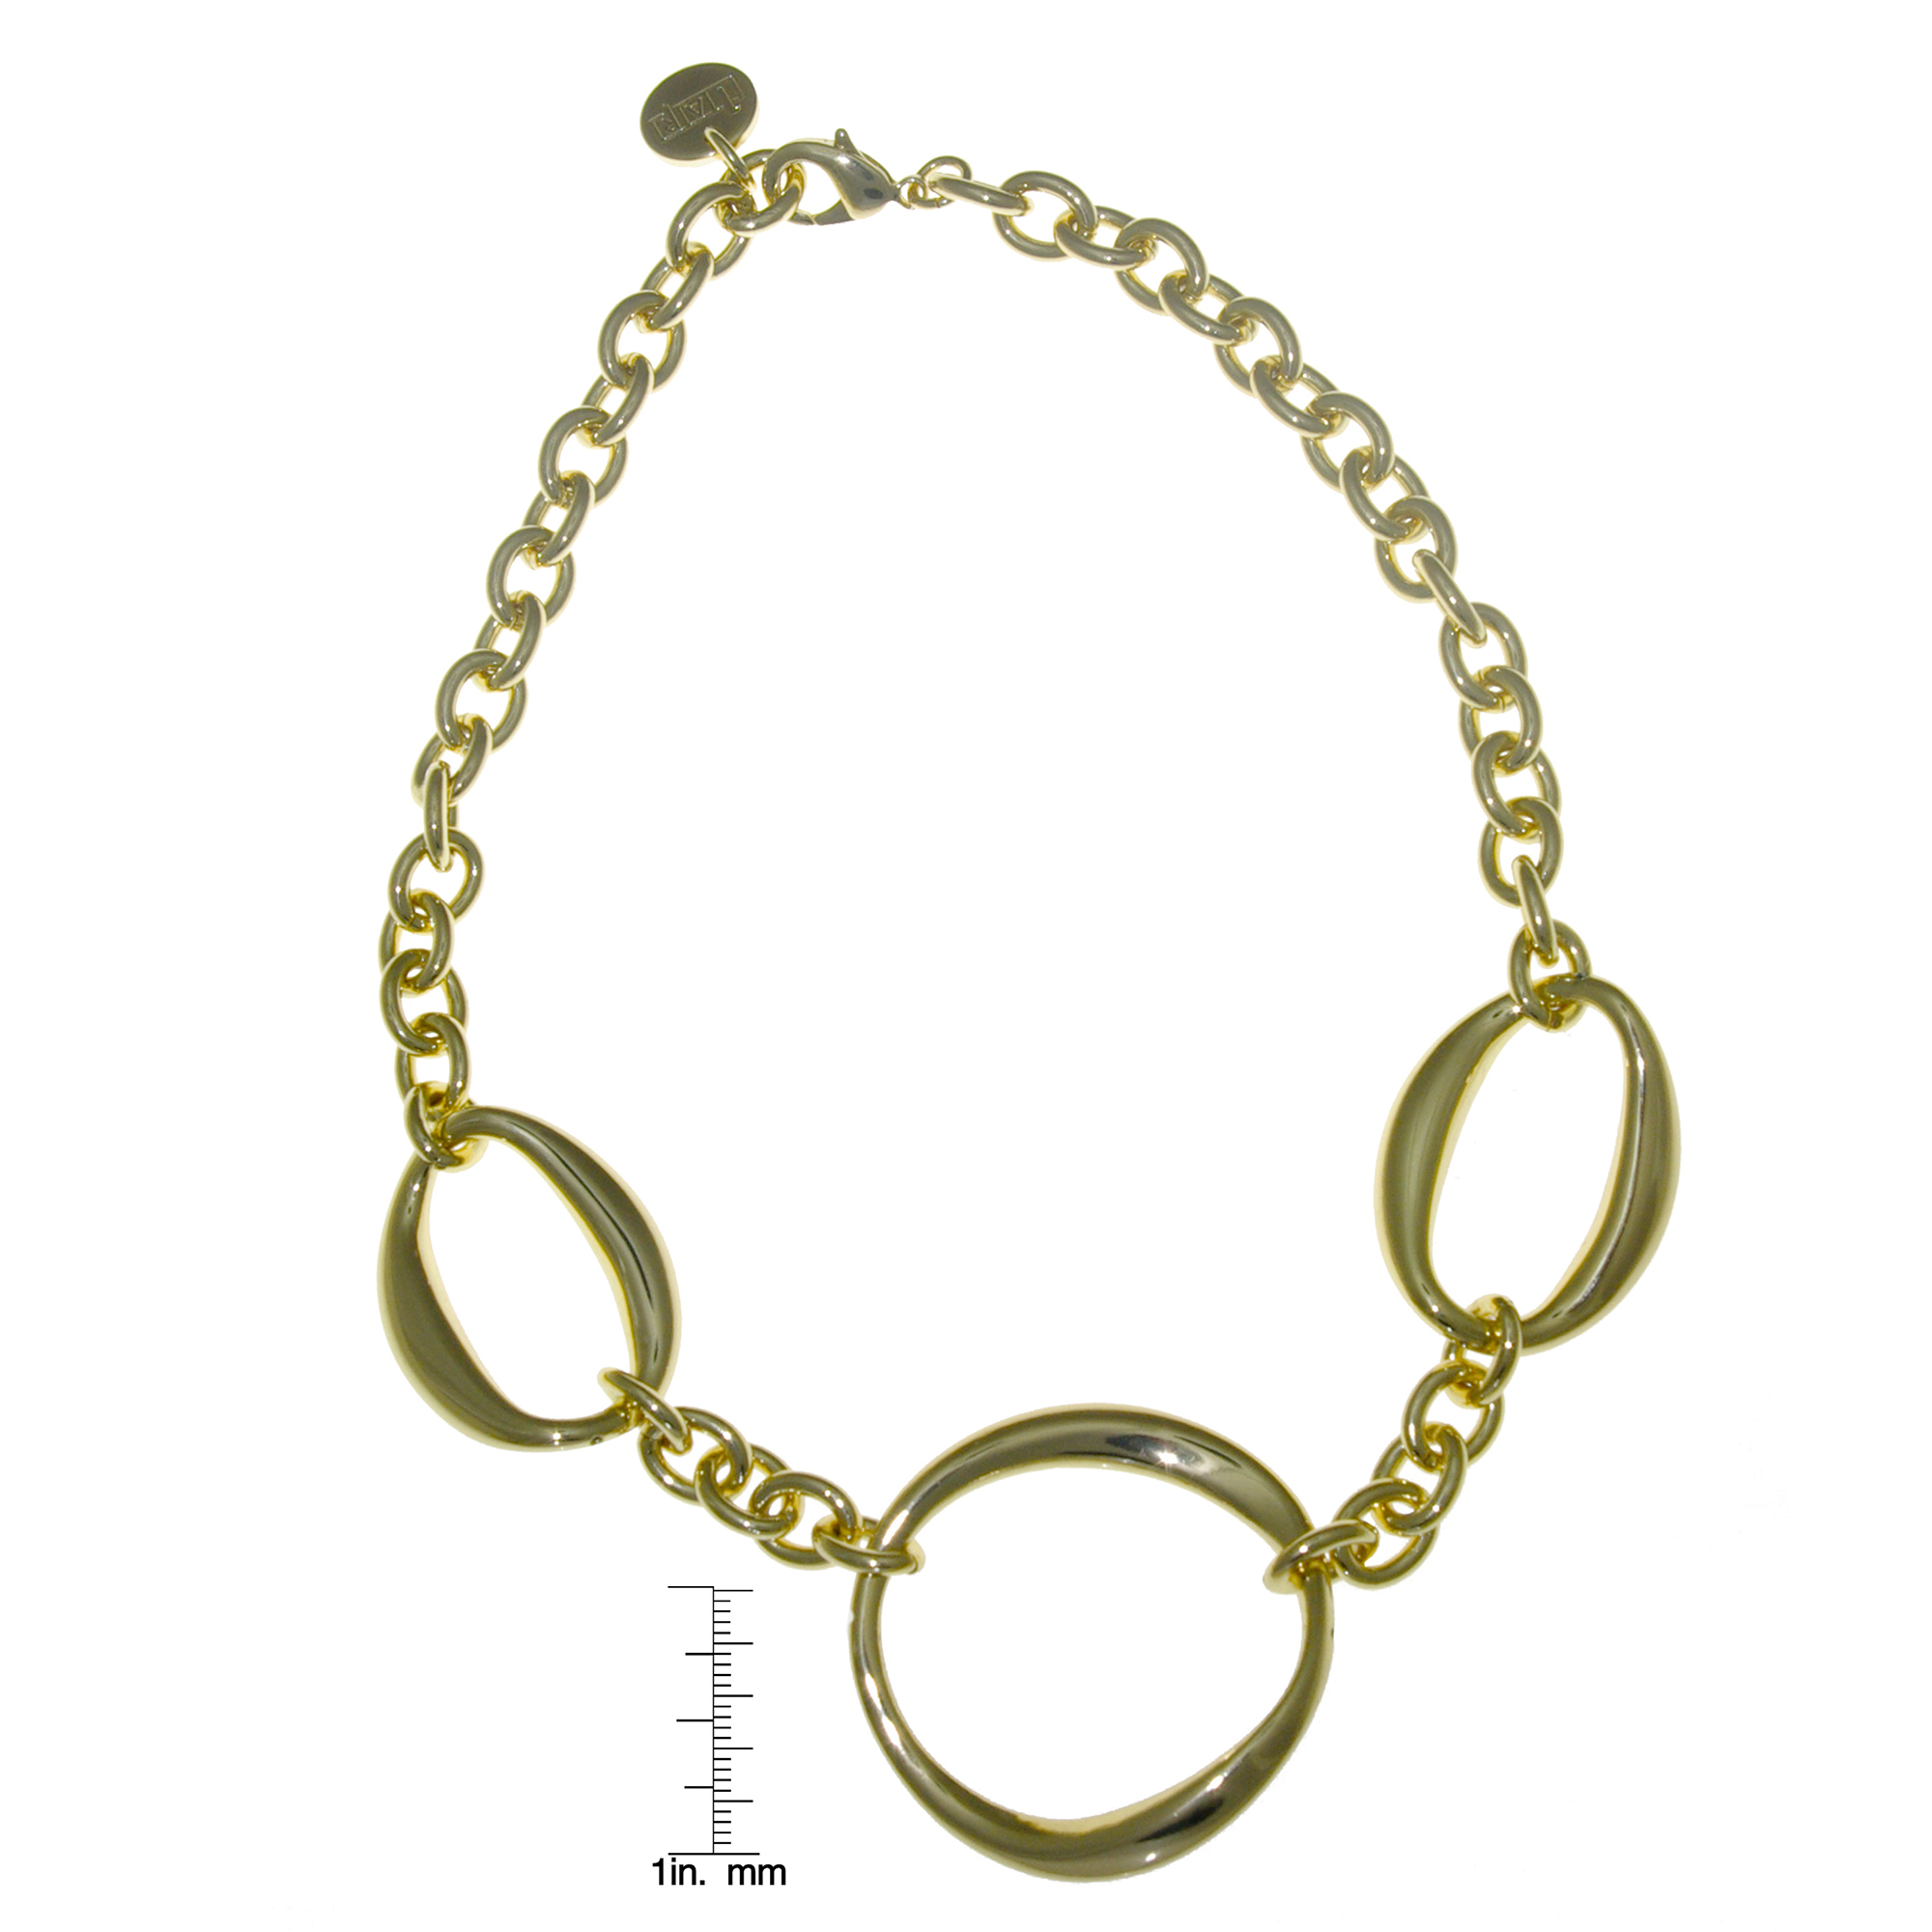 Collection Bijoux 18K Gold Plated Choker Necklace With Large Oval And Small Circle Links